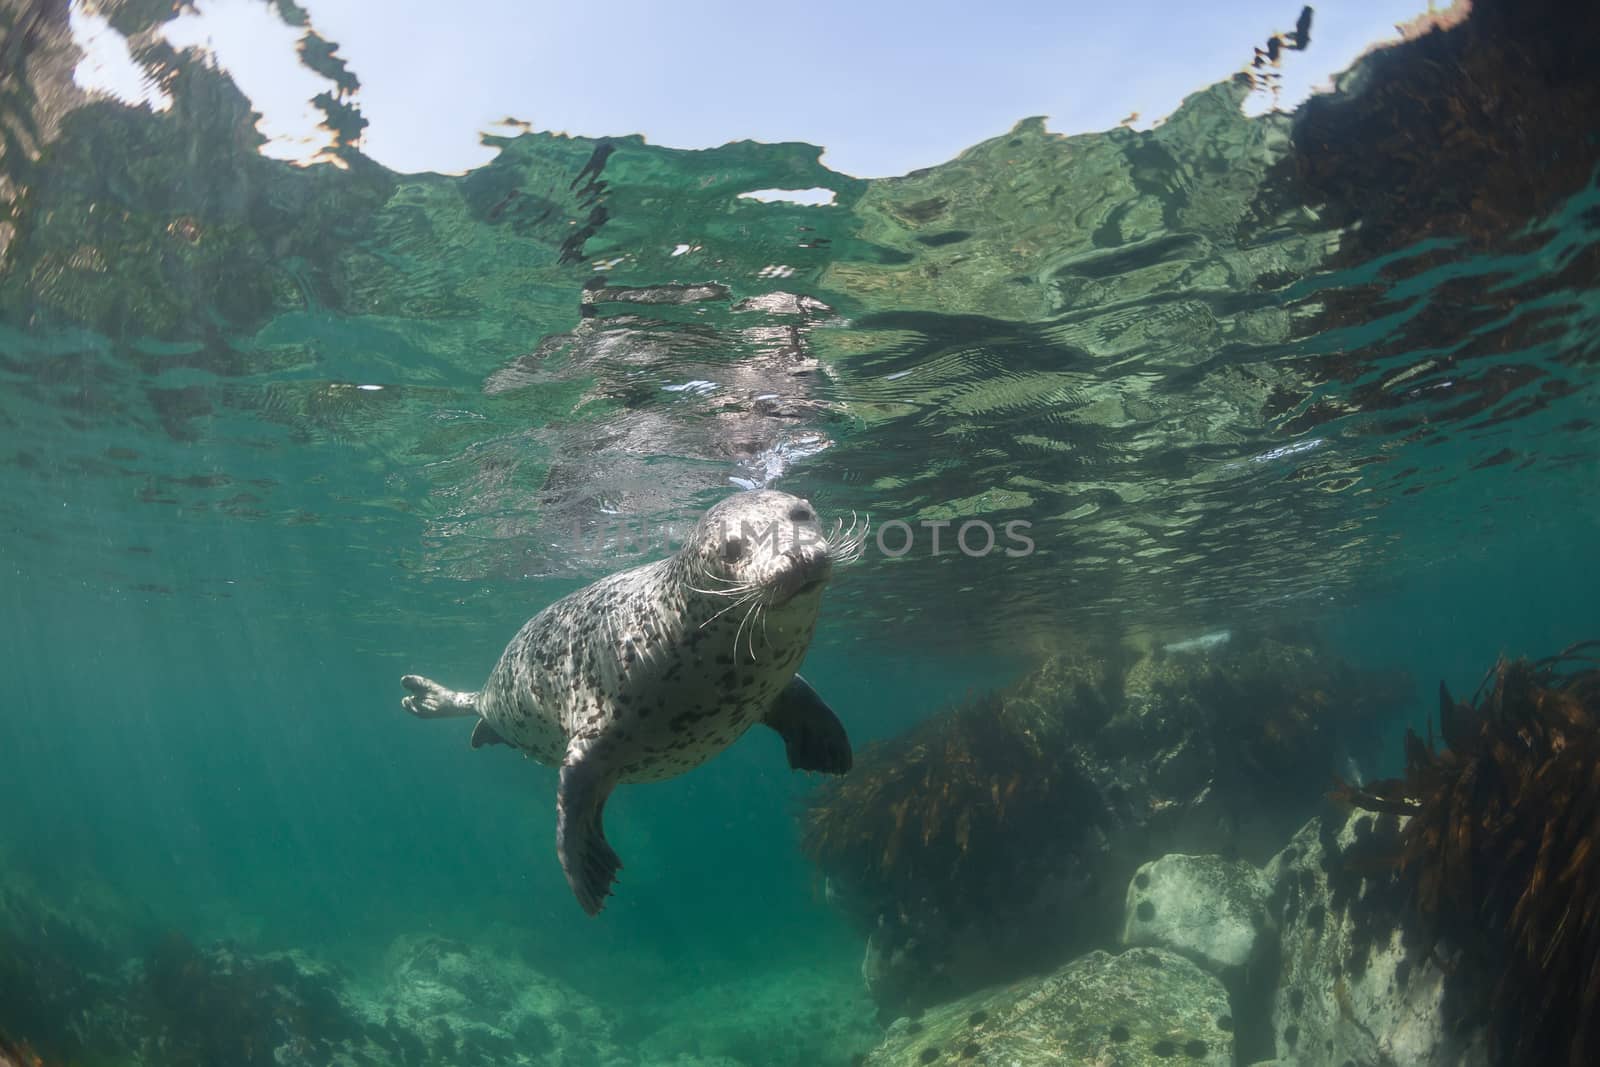 Phoca largha (Larga Seal, Spotted Seal) underwater pictures by desant7474